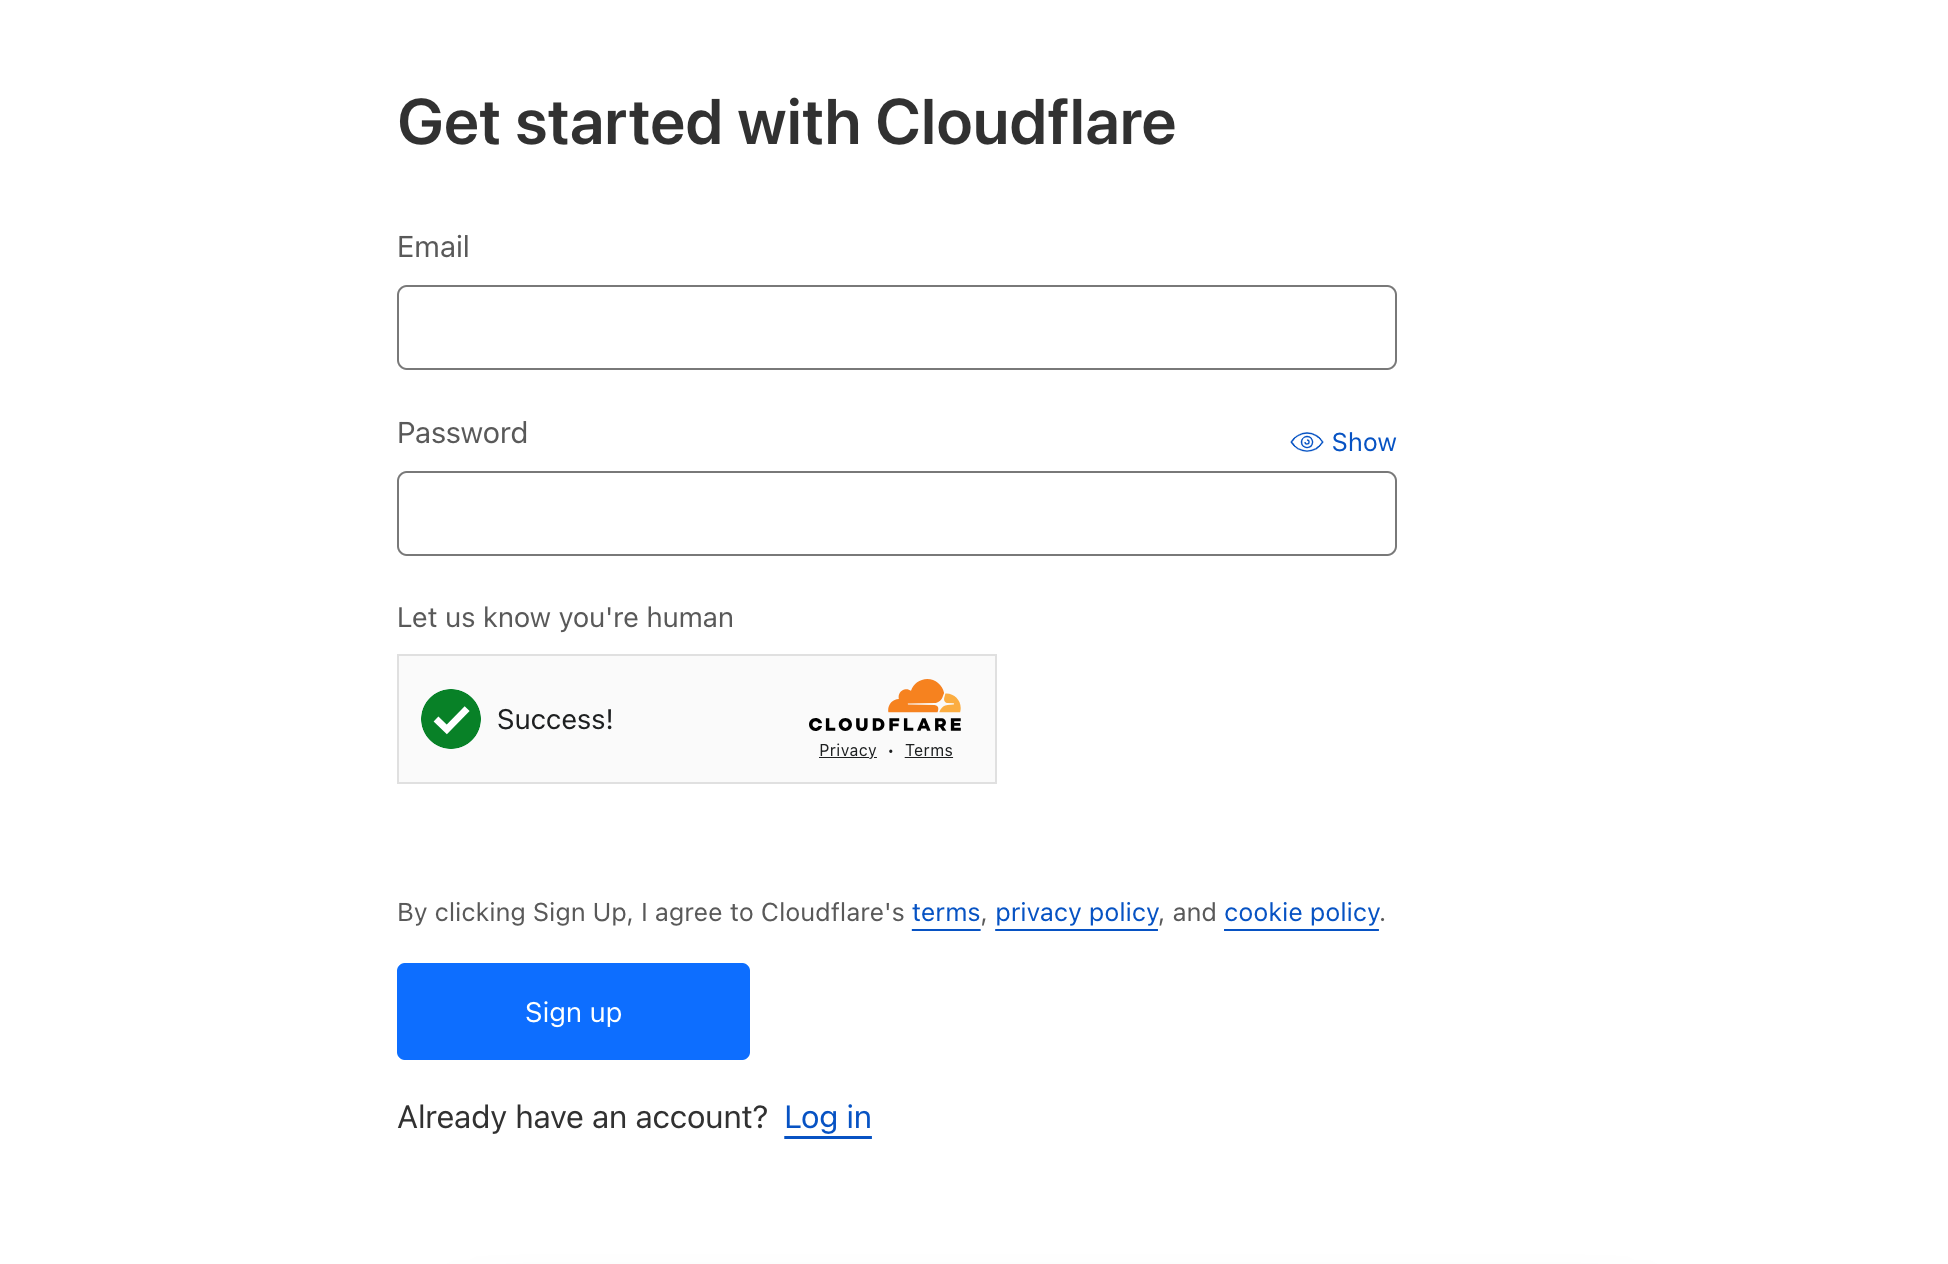 Creating a Cloudflare account